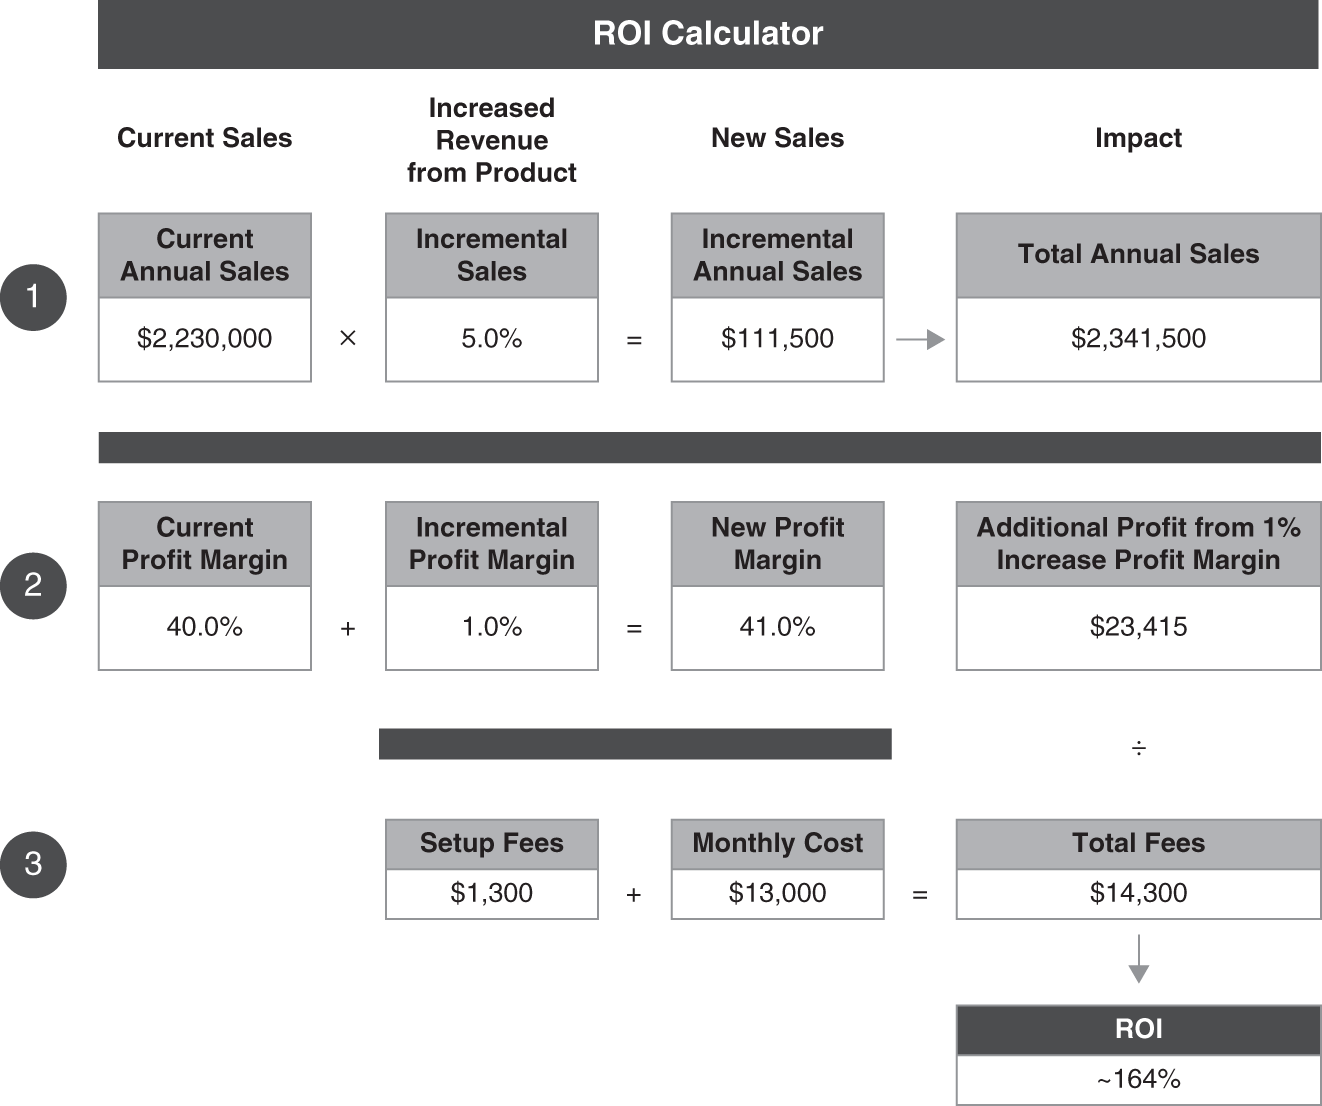 Illustration depicting the ROI (Return on Investment) calculator divided into 3 parts for measuring the value of revenue increases in a business.